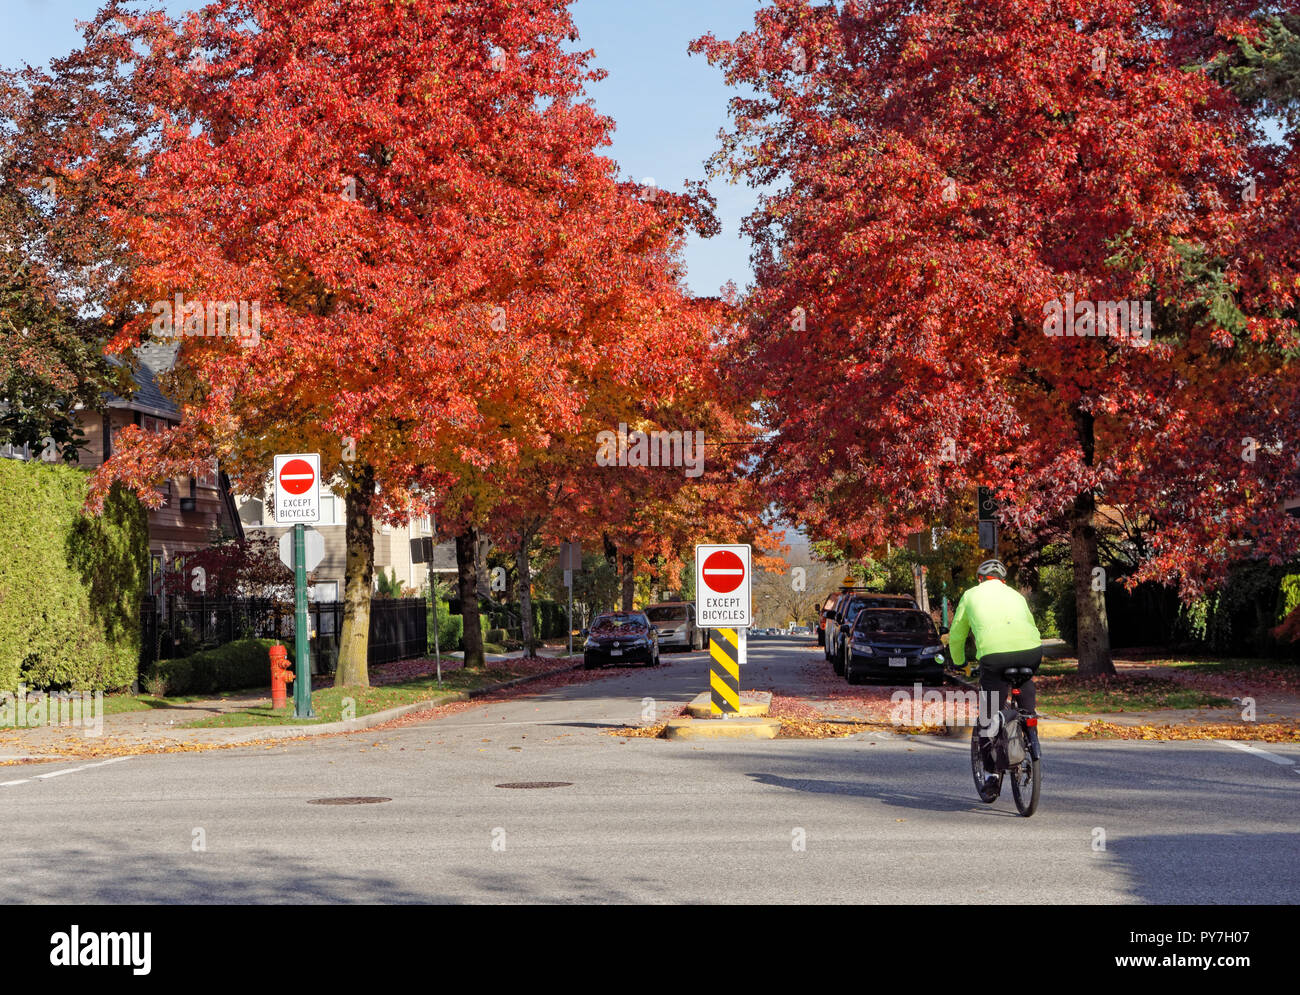 Cyclist in an urban bicycle lane with colorful fall foliage, Vancouver, BC, Canada Stock Photo